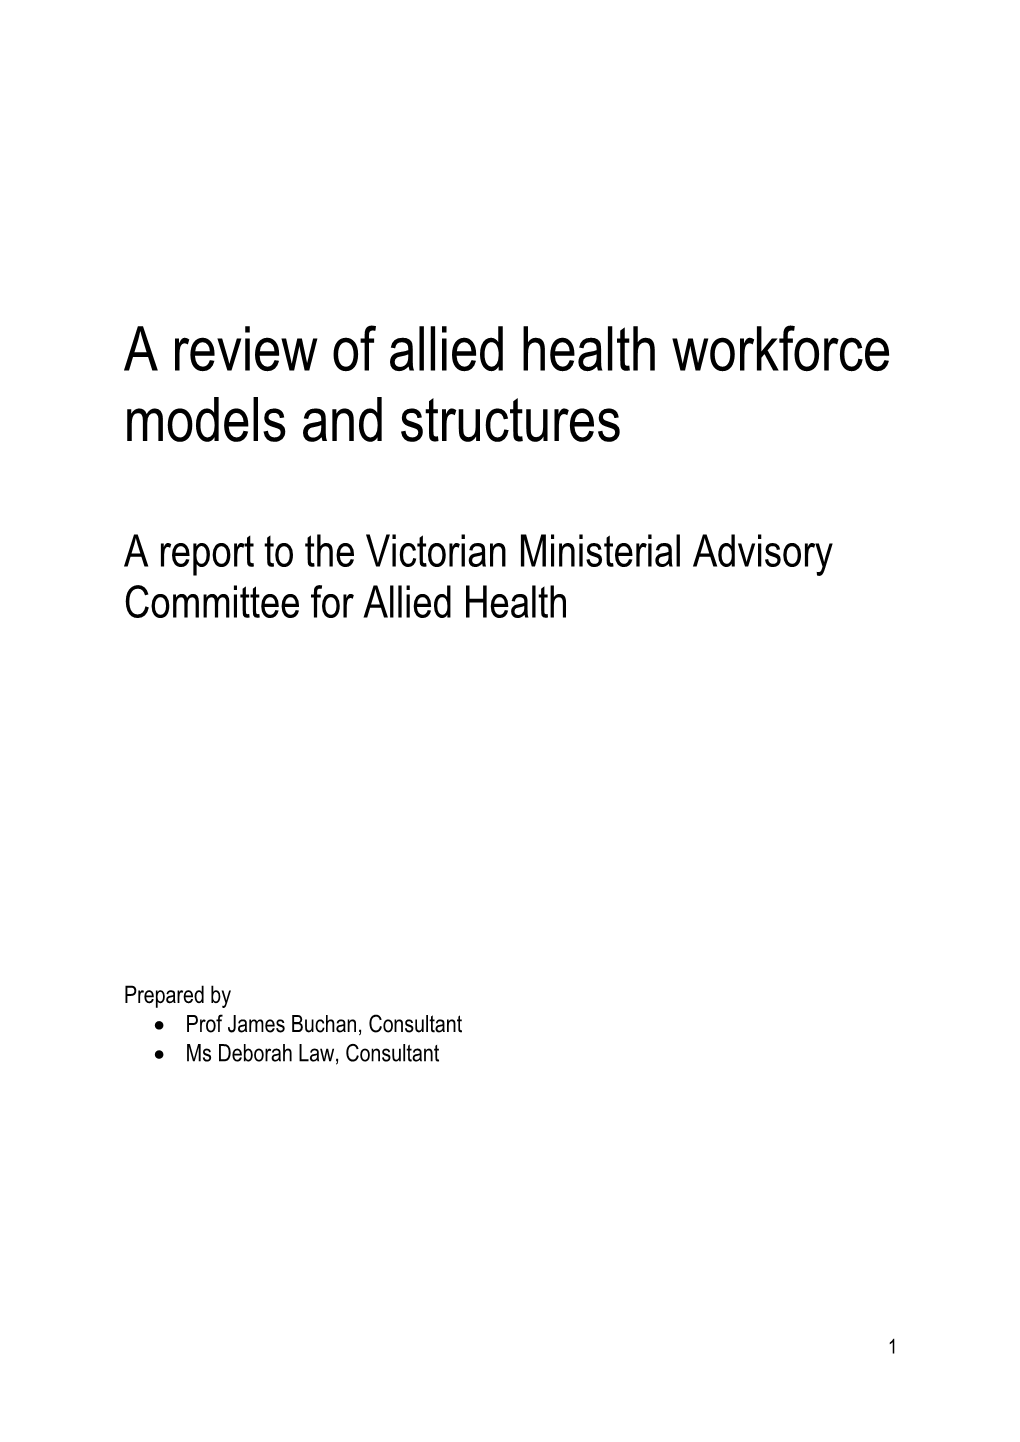 A Review of Allied Health Workforce Models and Structures